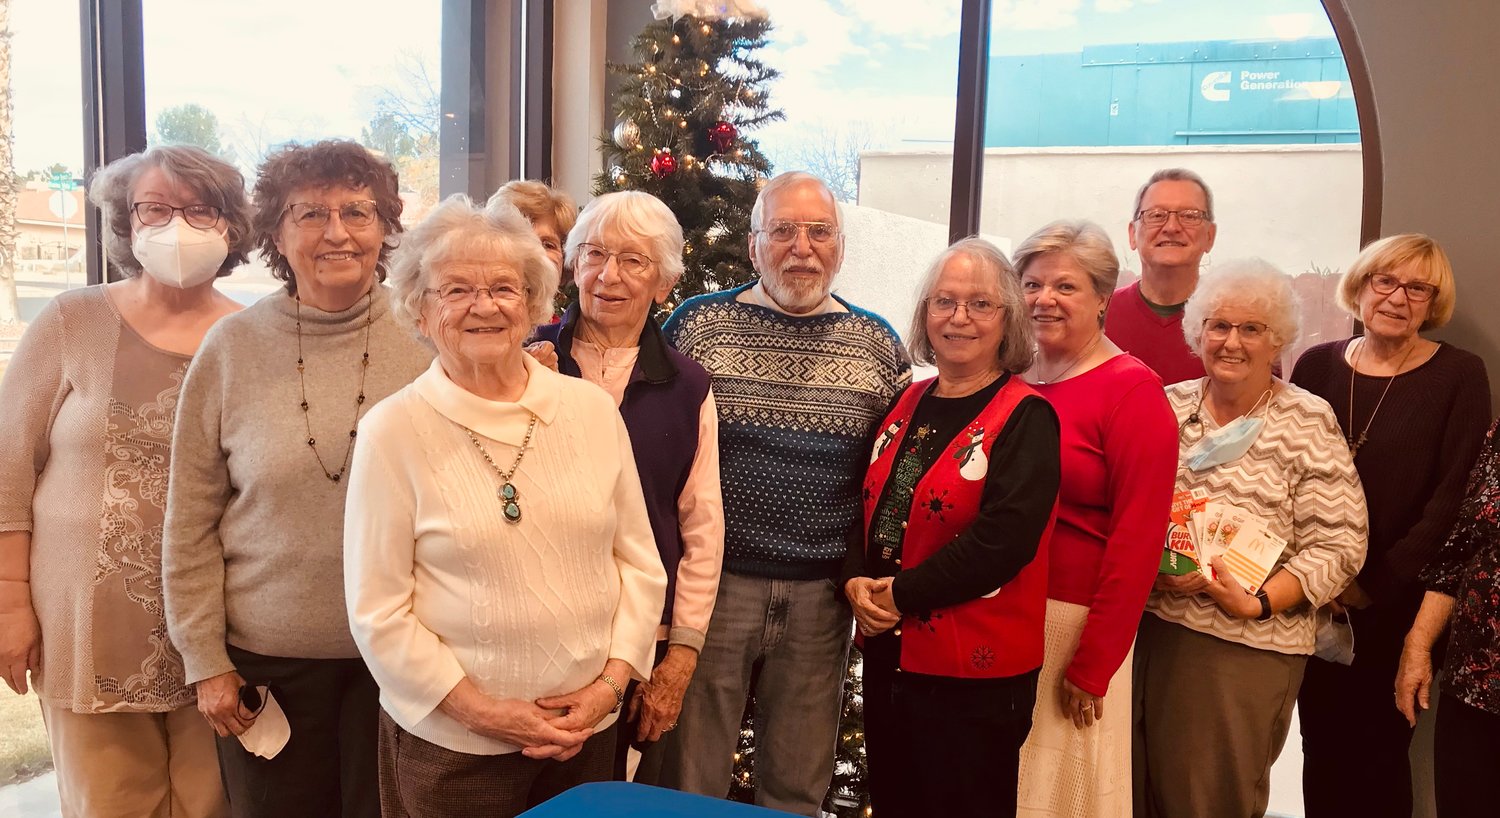 The Las Cruces Association of Educational Retirees collected more than 60 gift cards during its December lunch meeting and donated $815 to Project Link, the Las Cruces Public Schools program for homeless students. For more information, contact Peggy Nelson at peggywnelson@gmail.com.